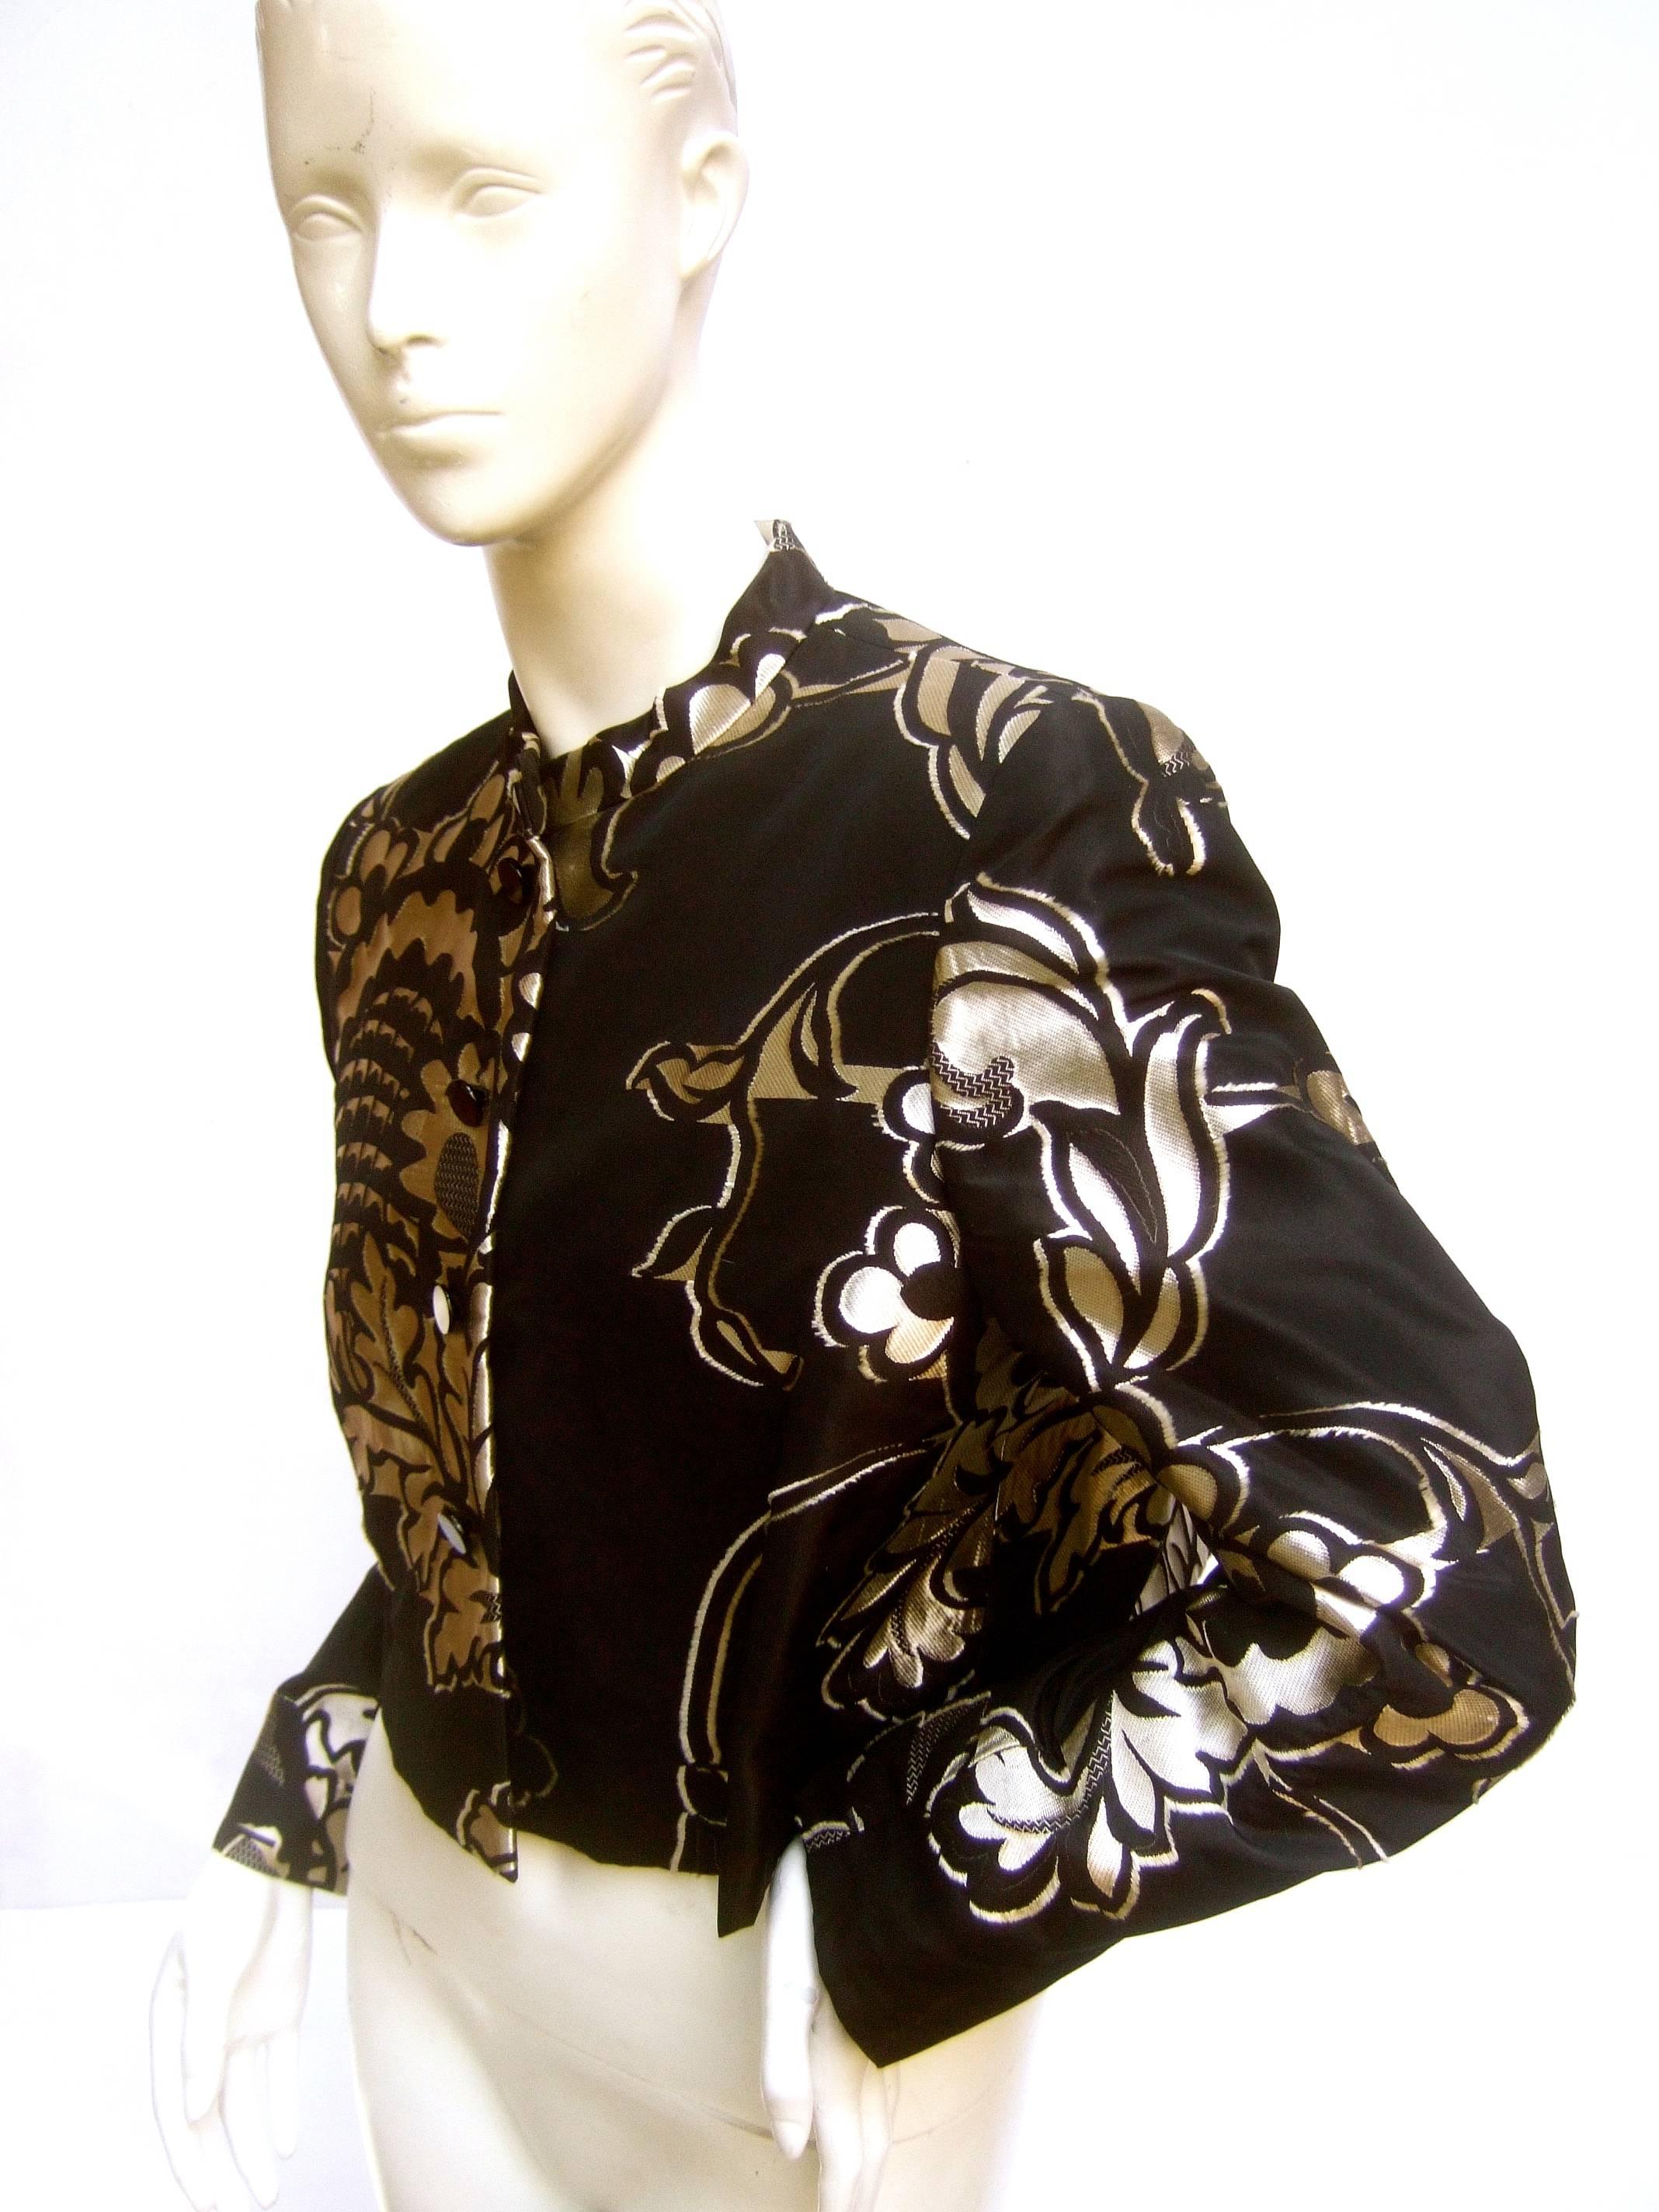 Bill Blass for Neiman Marcus black & gold brocade bolero
The chic designer designer cropped lame jacket 
is embellished with sinuous metallic foliage  

The gold metallic foliage is illuminated against
the solid black background. The fabric has